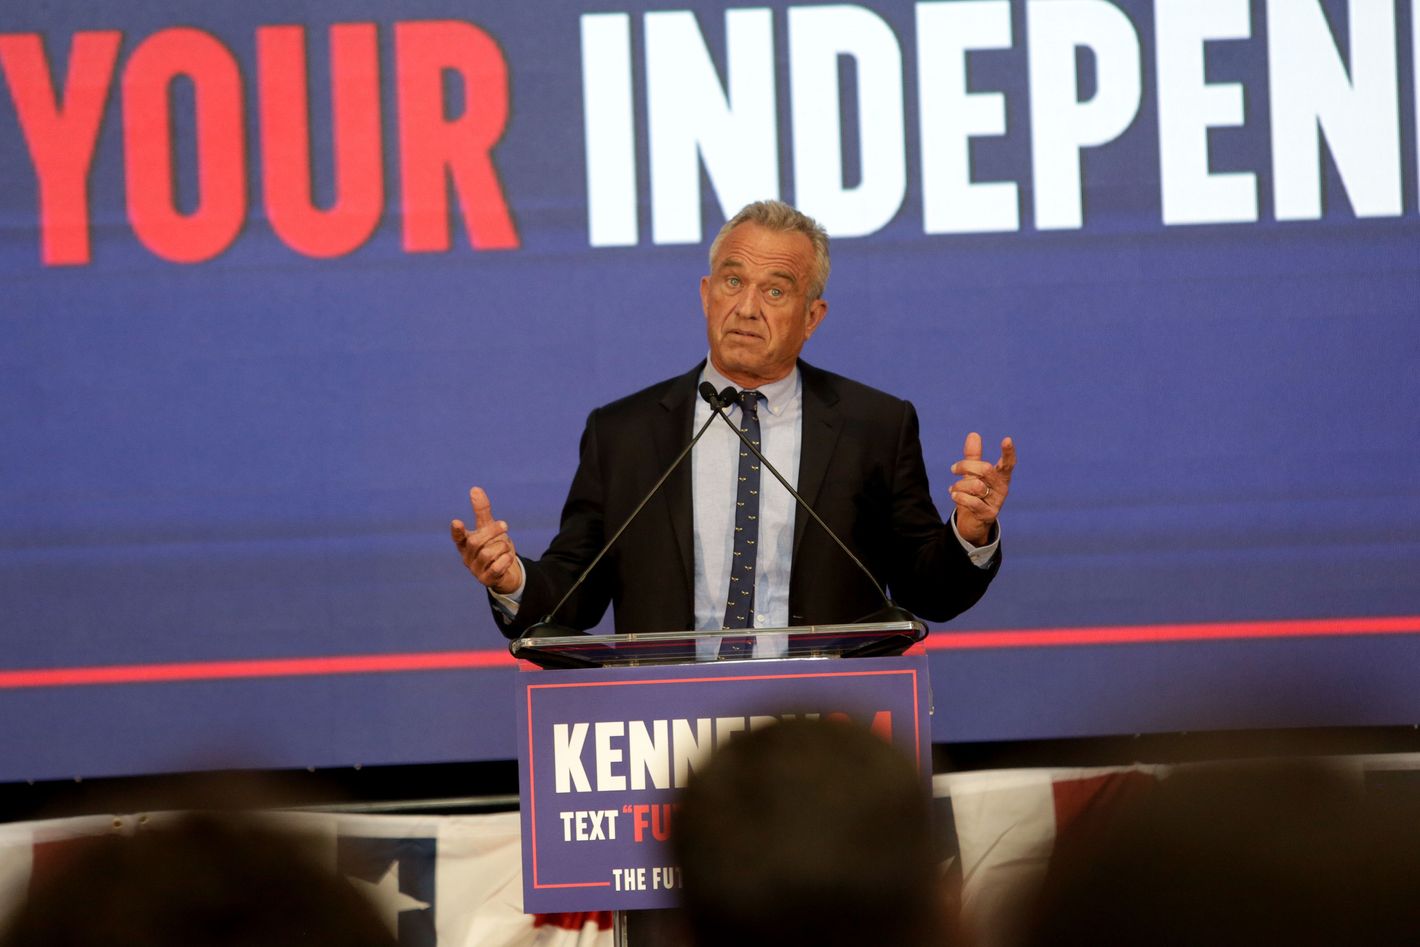 Democracy Doesn’t Need Independent Candidates Like RFK Jr.